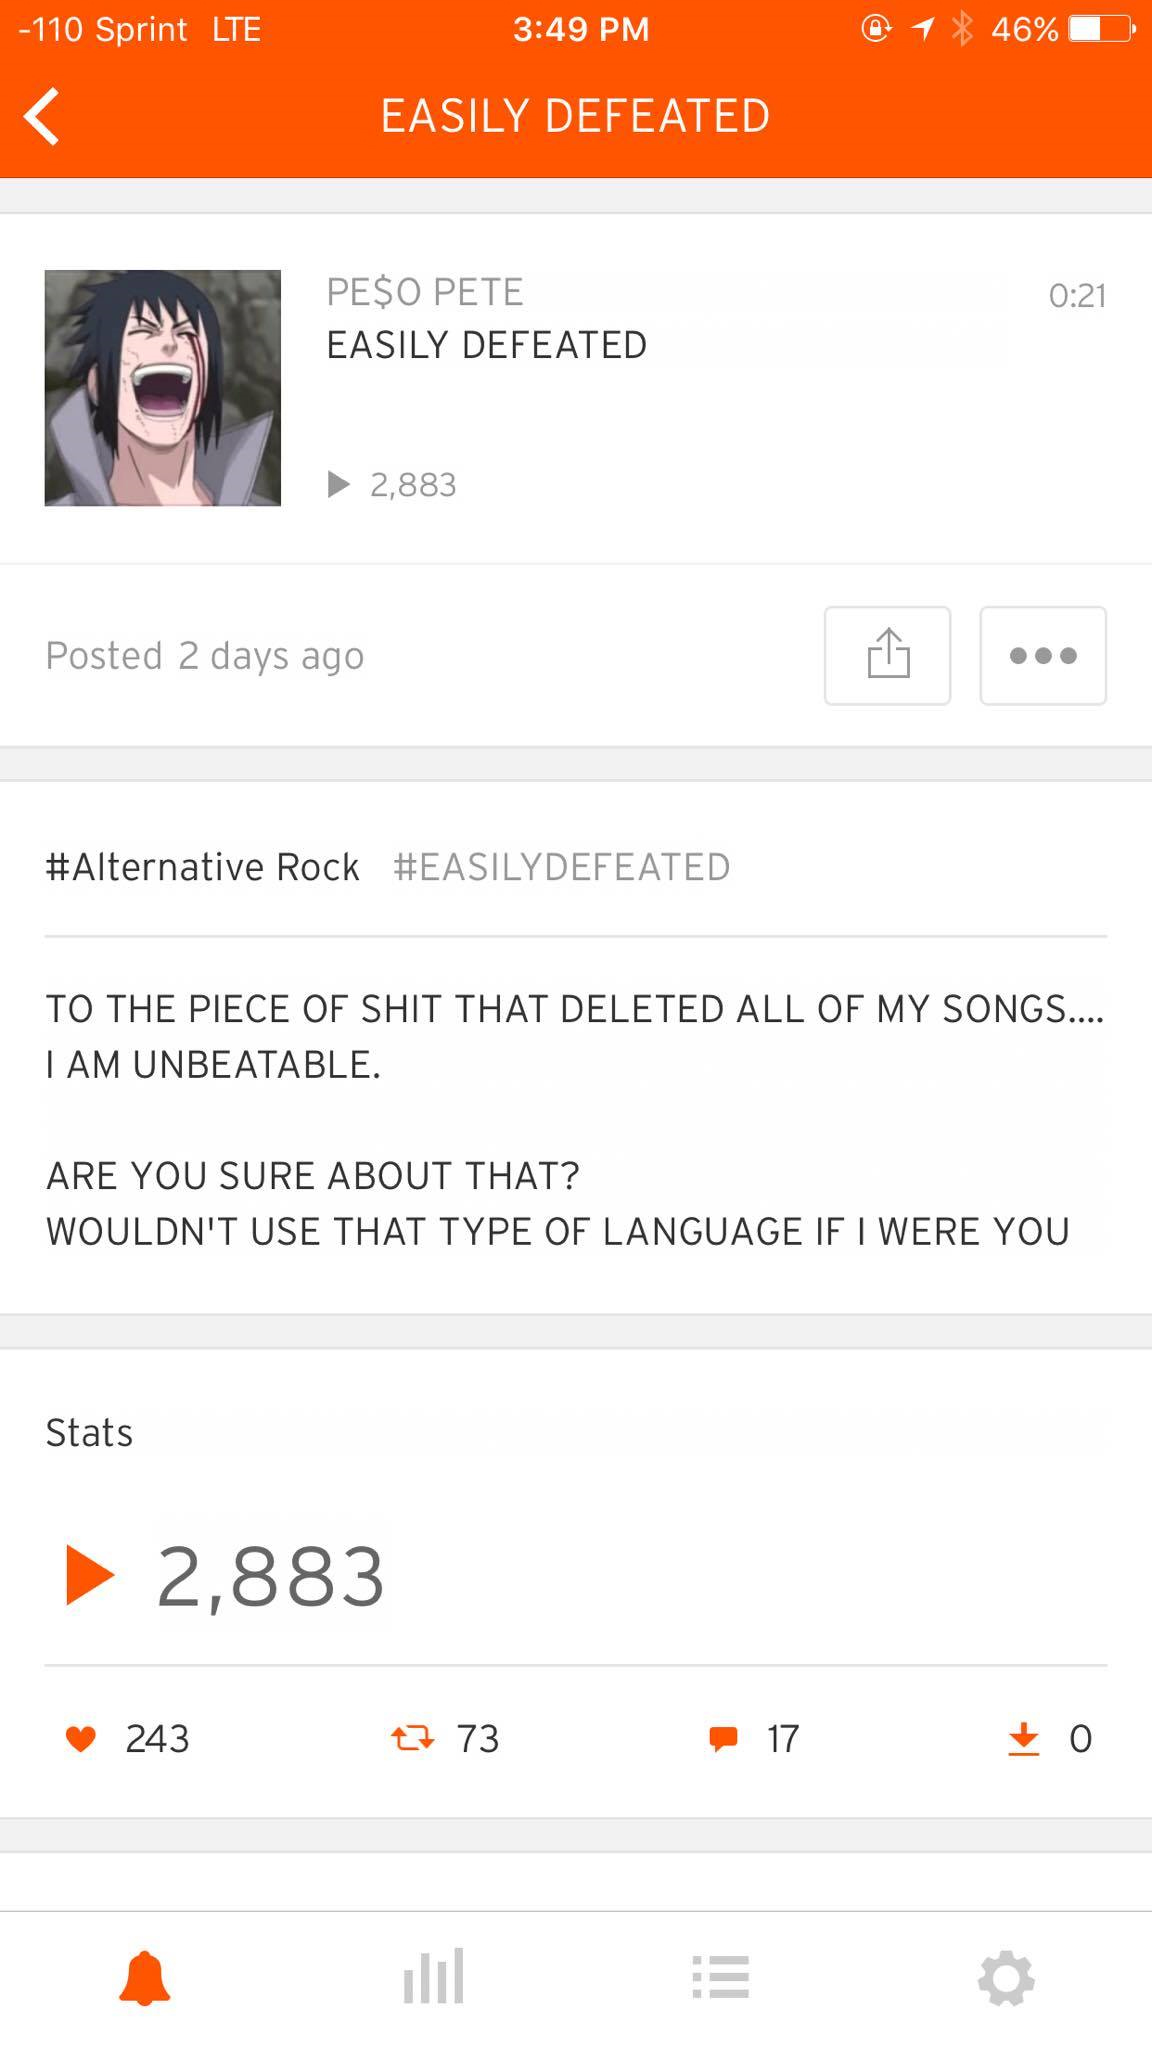 Meltycanon Collaborator Account Hacked as He Nears 1 million plays